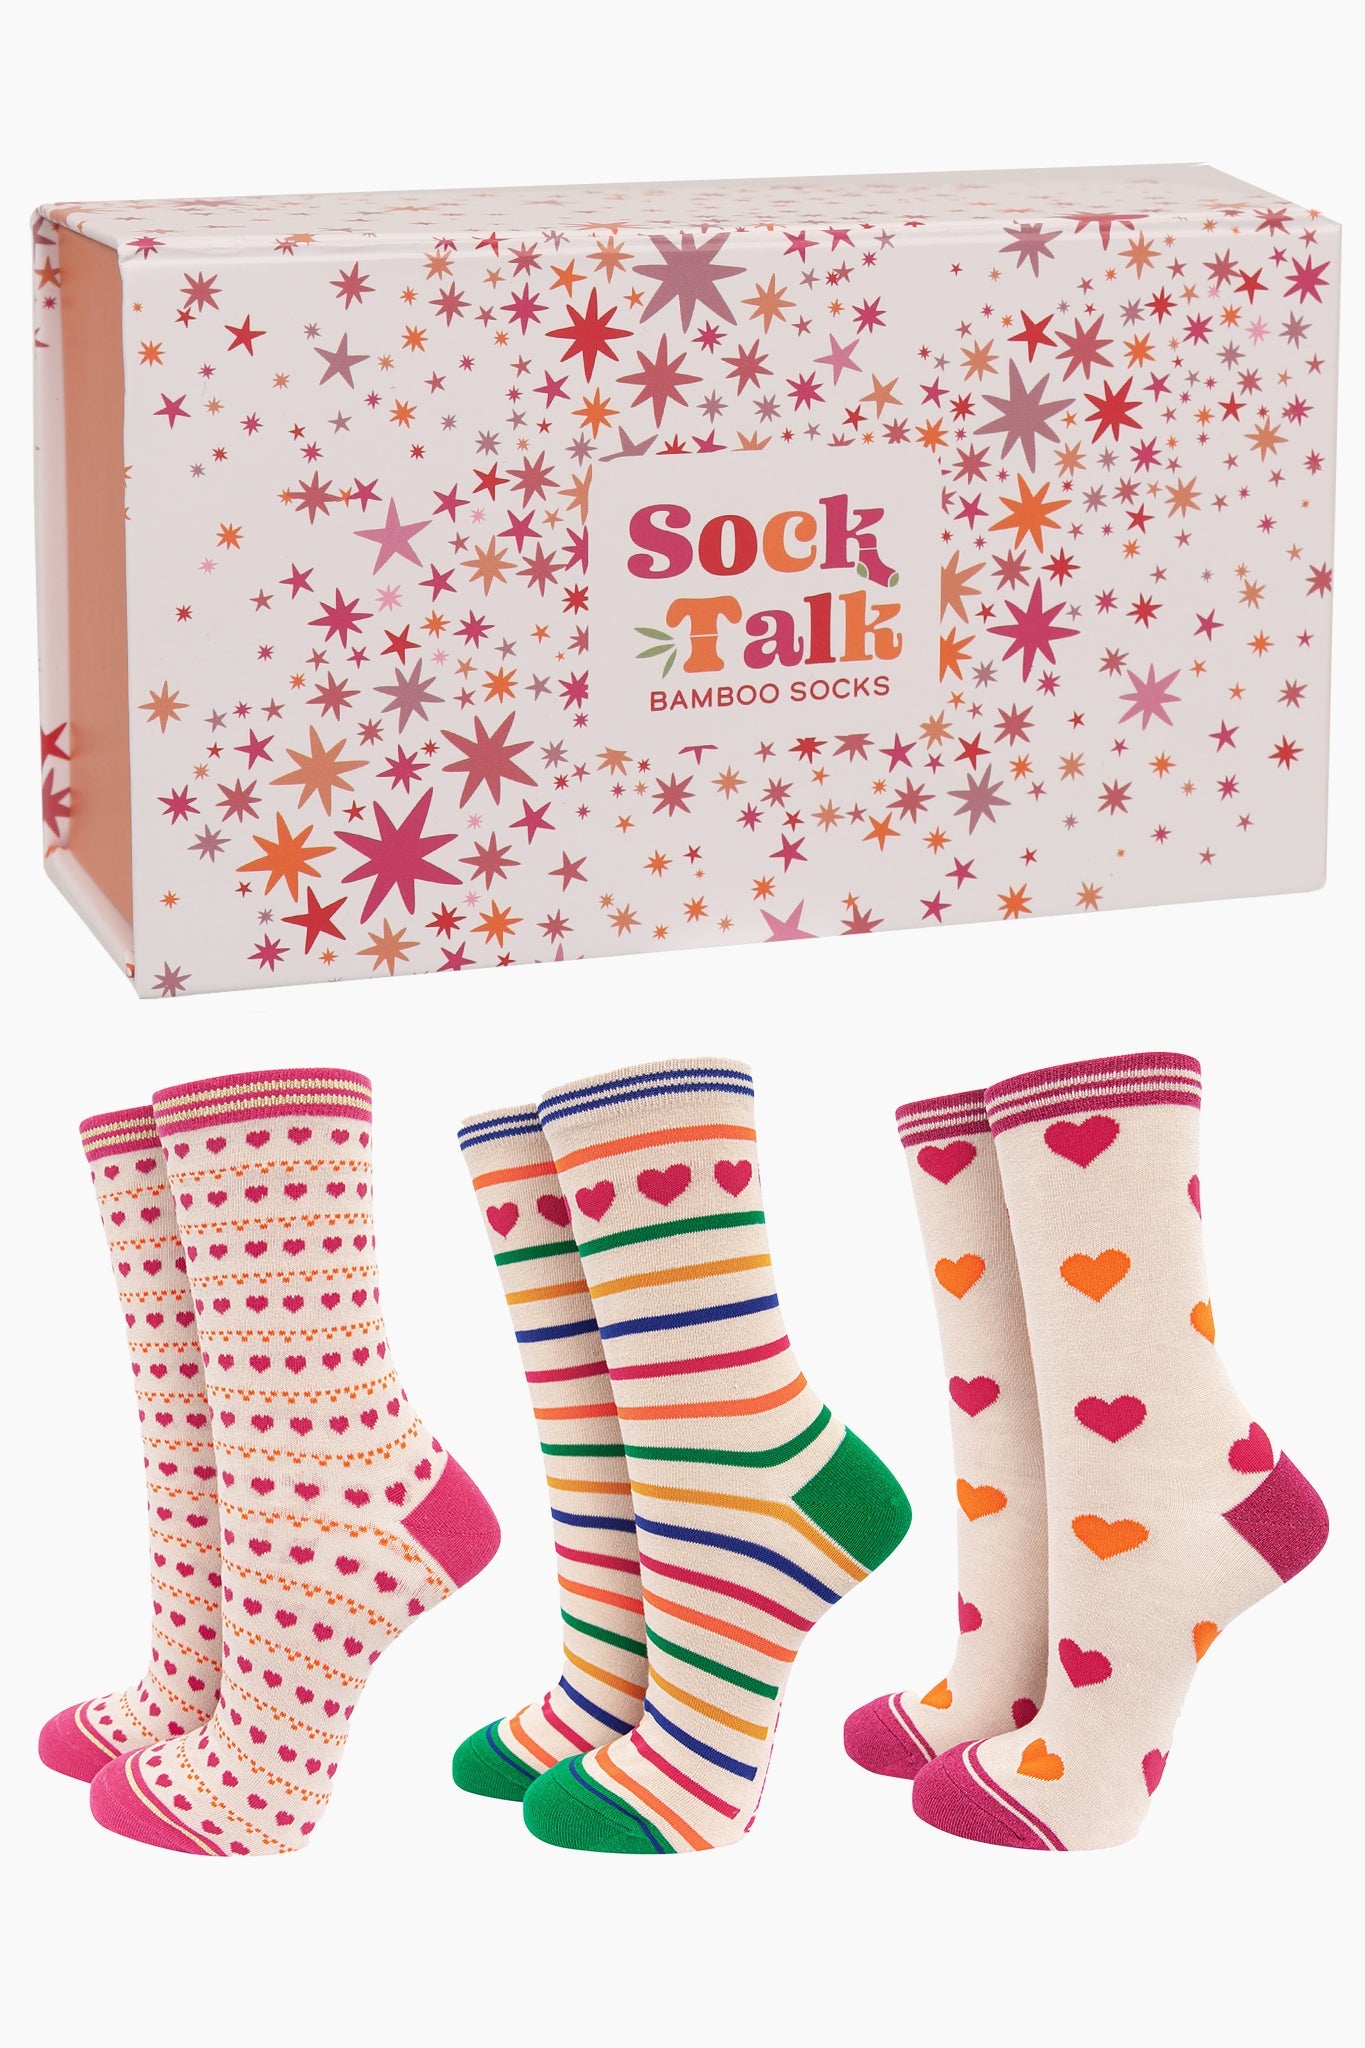 white gift box with an all over pink scattered star print containing three pairs of colourful bamboo socks featuring love hearts, spots and stripes